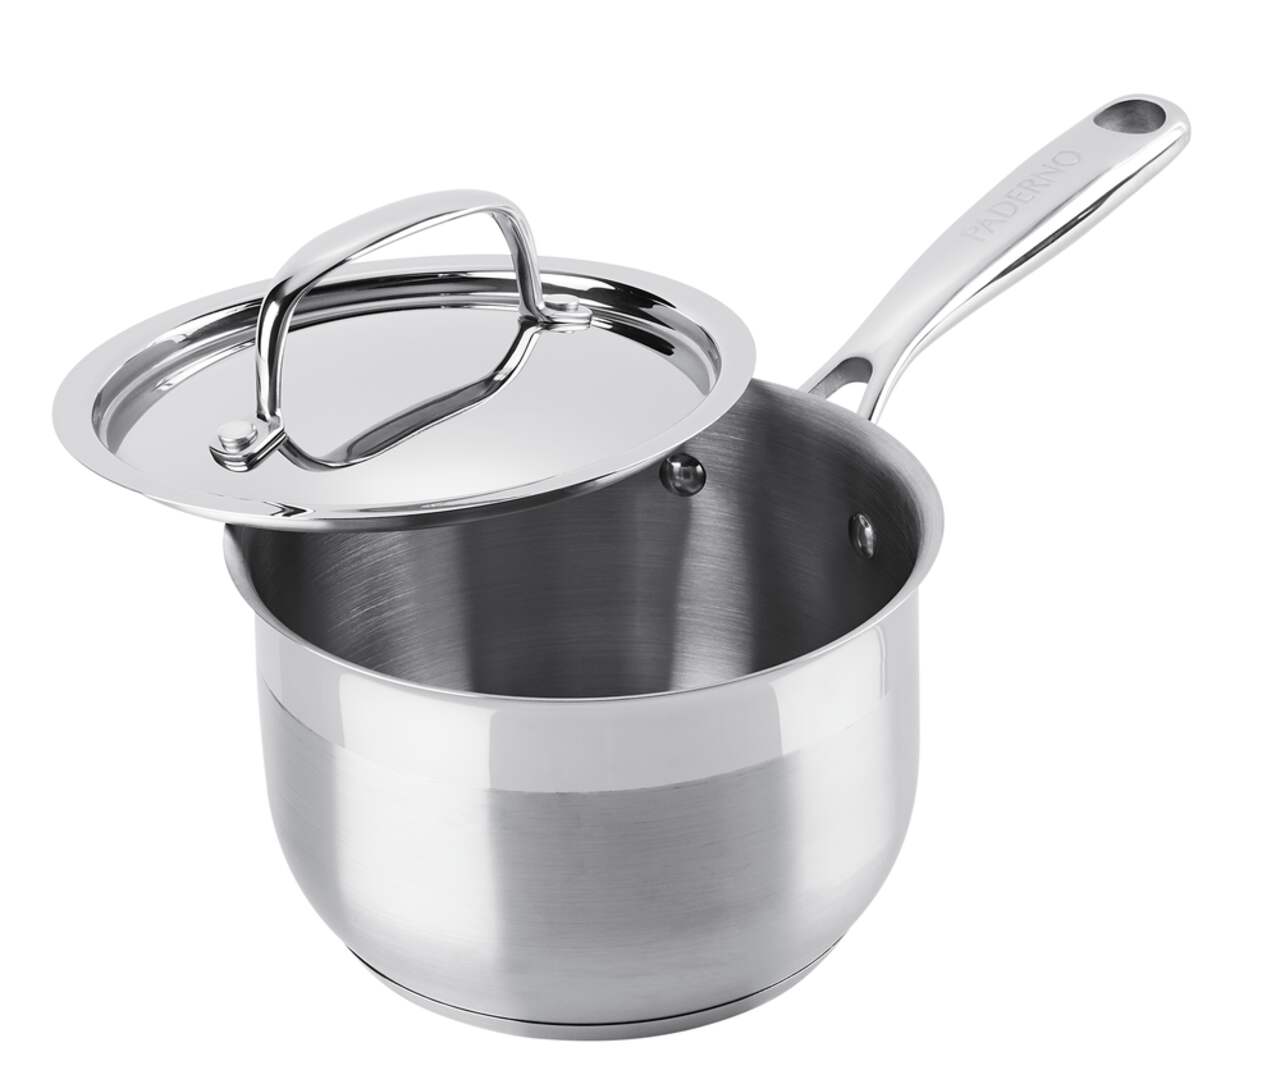 https://media-www.canadiantire.ca/product/living/kitchen/cookware/1425574/paderno-classic-stainless-steel-2qt-saucepan-becc6f41-b8dd-419e-8bc7-59b316ba1f3c.png?imdensity=1&imwidth=640&impolicy=mZoom